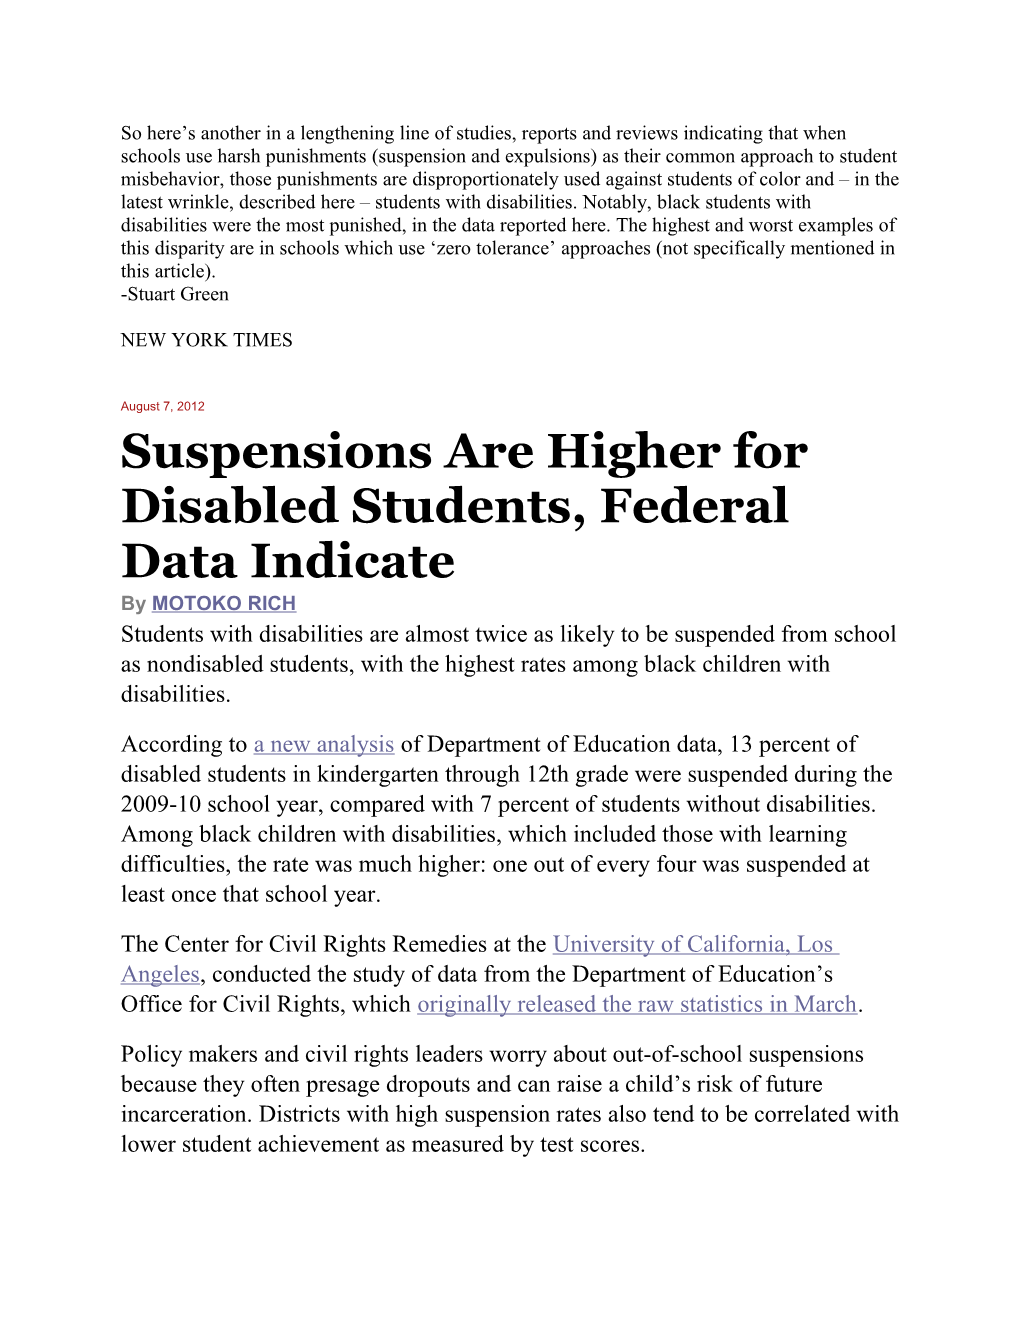 Suspensions Are Higher for Disabled Students, Federal Data Indicate